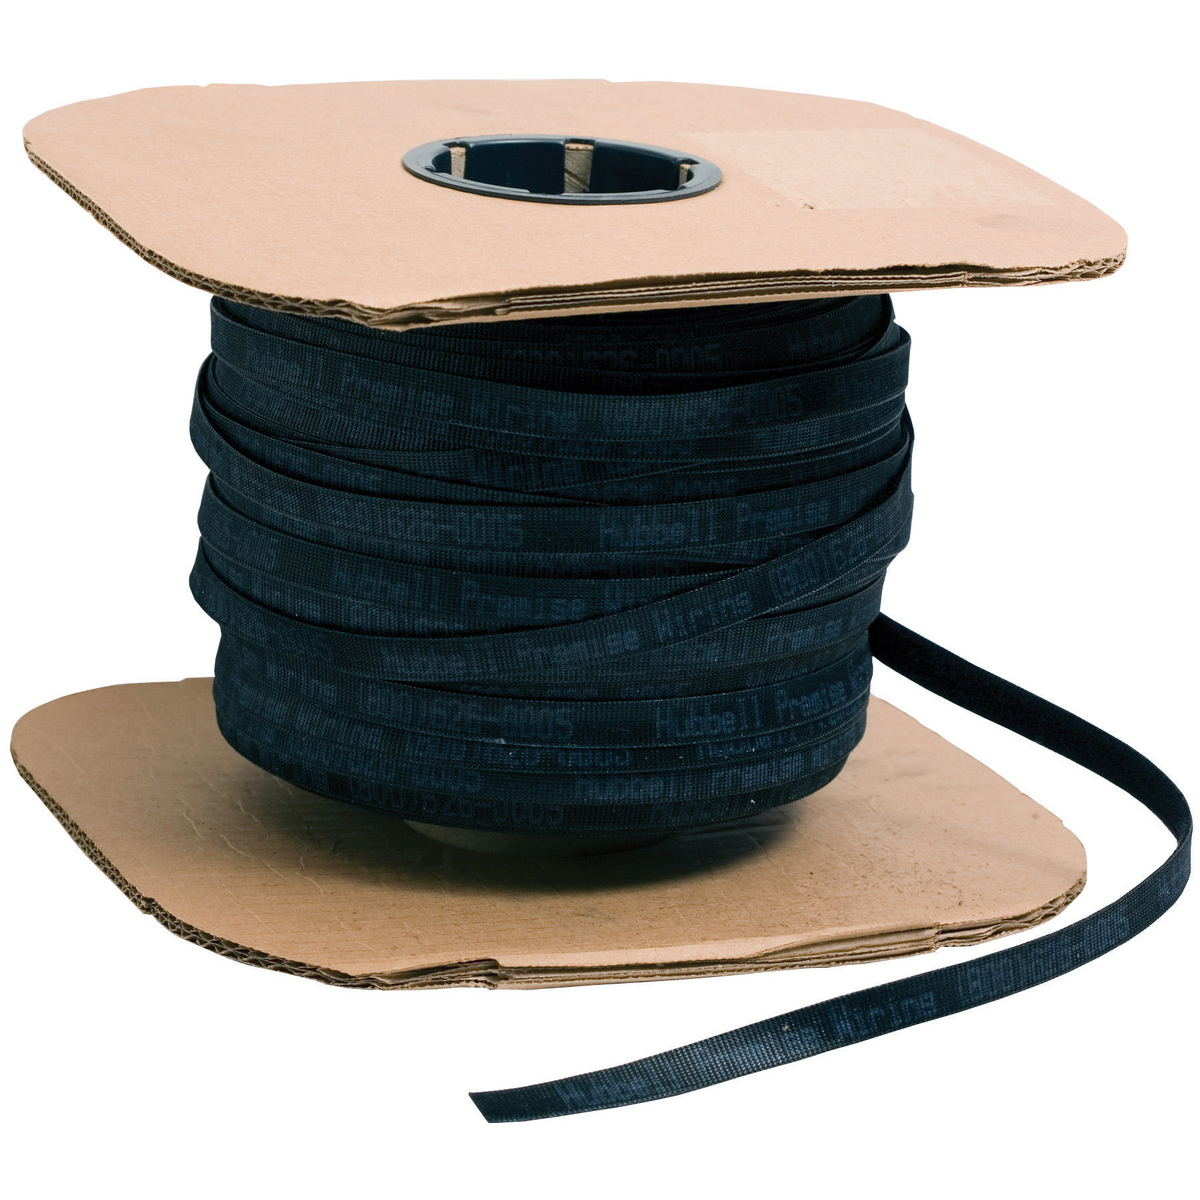 VELCRO® Brand One Wrap Cable Ties, Organizers & Fasteners